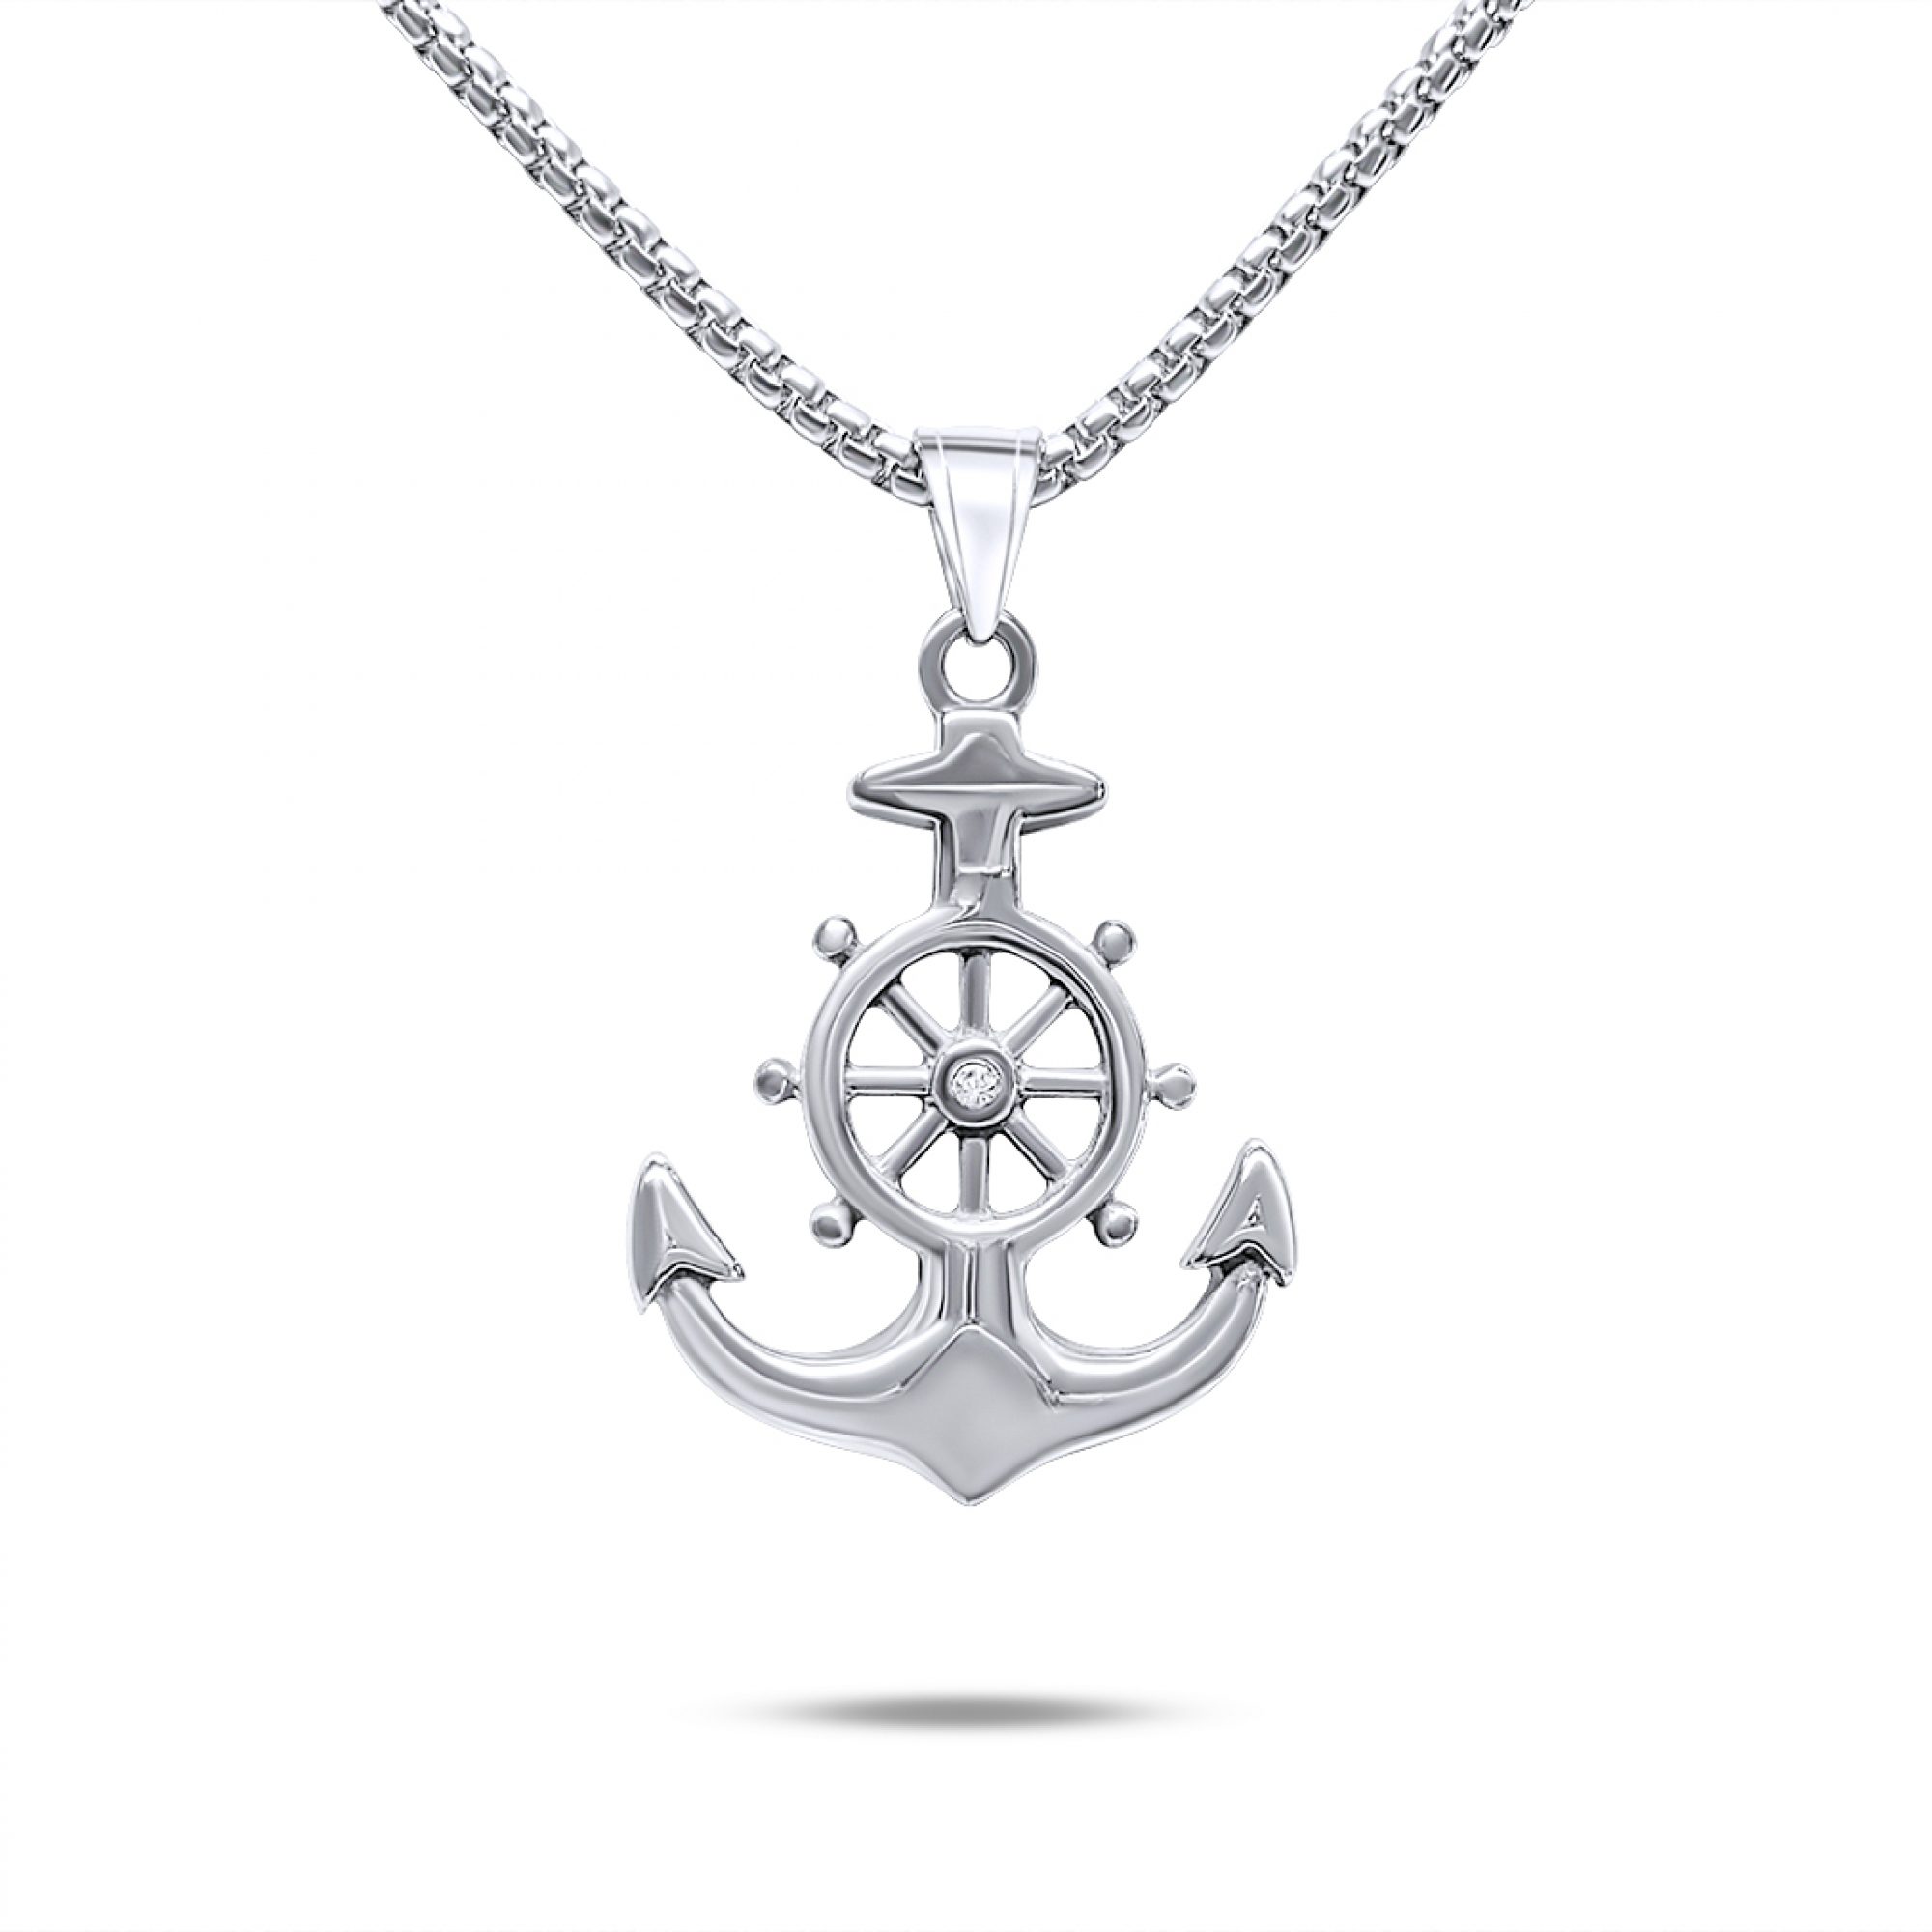 Steel anchor necklace